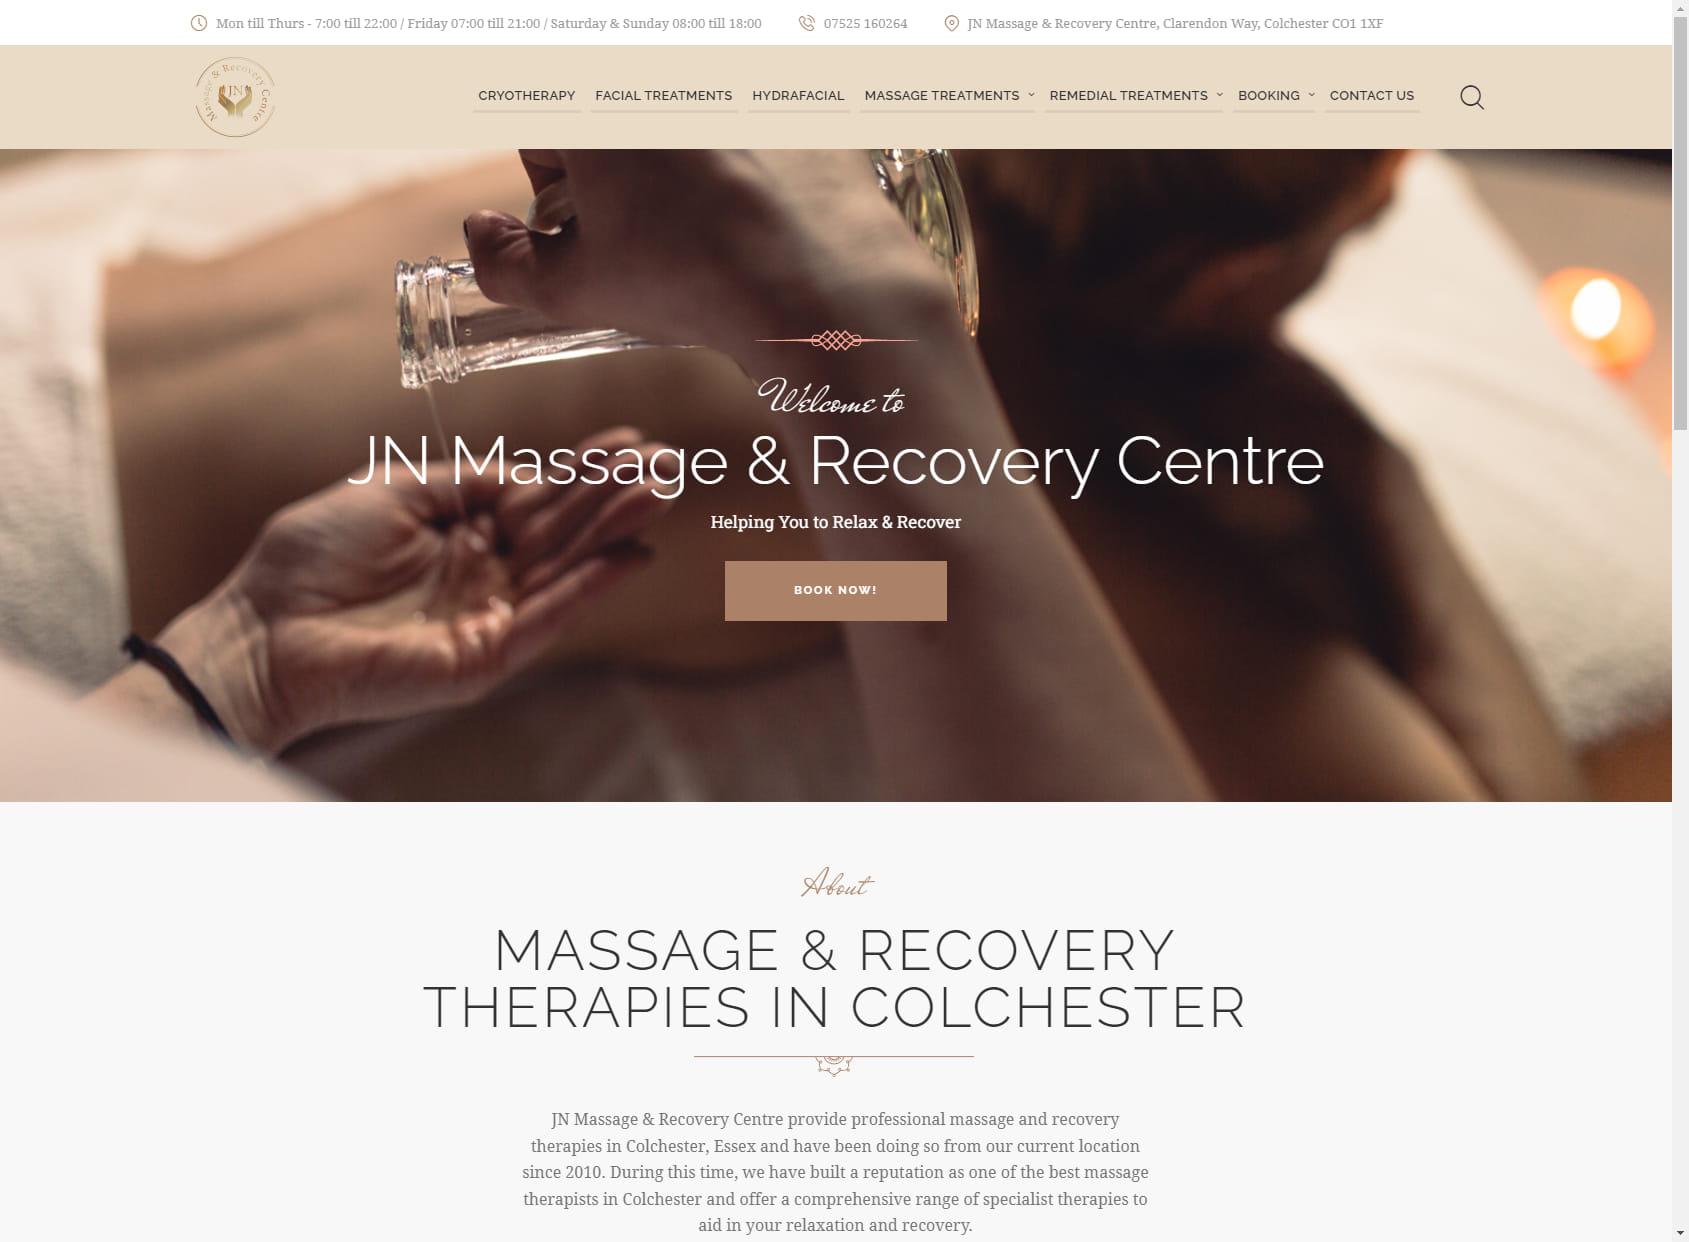 JN Massage & Recovery Centre